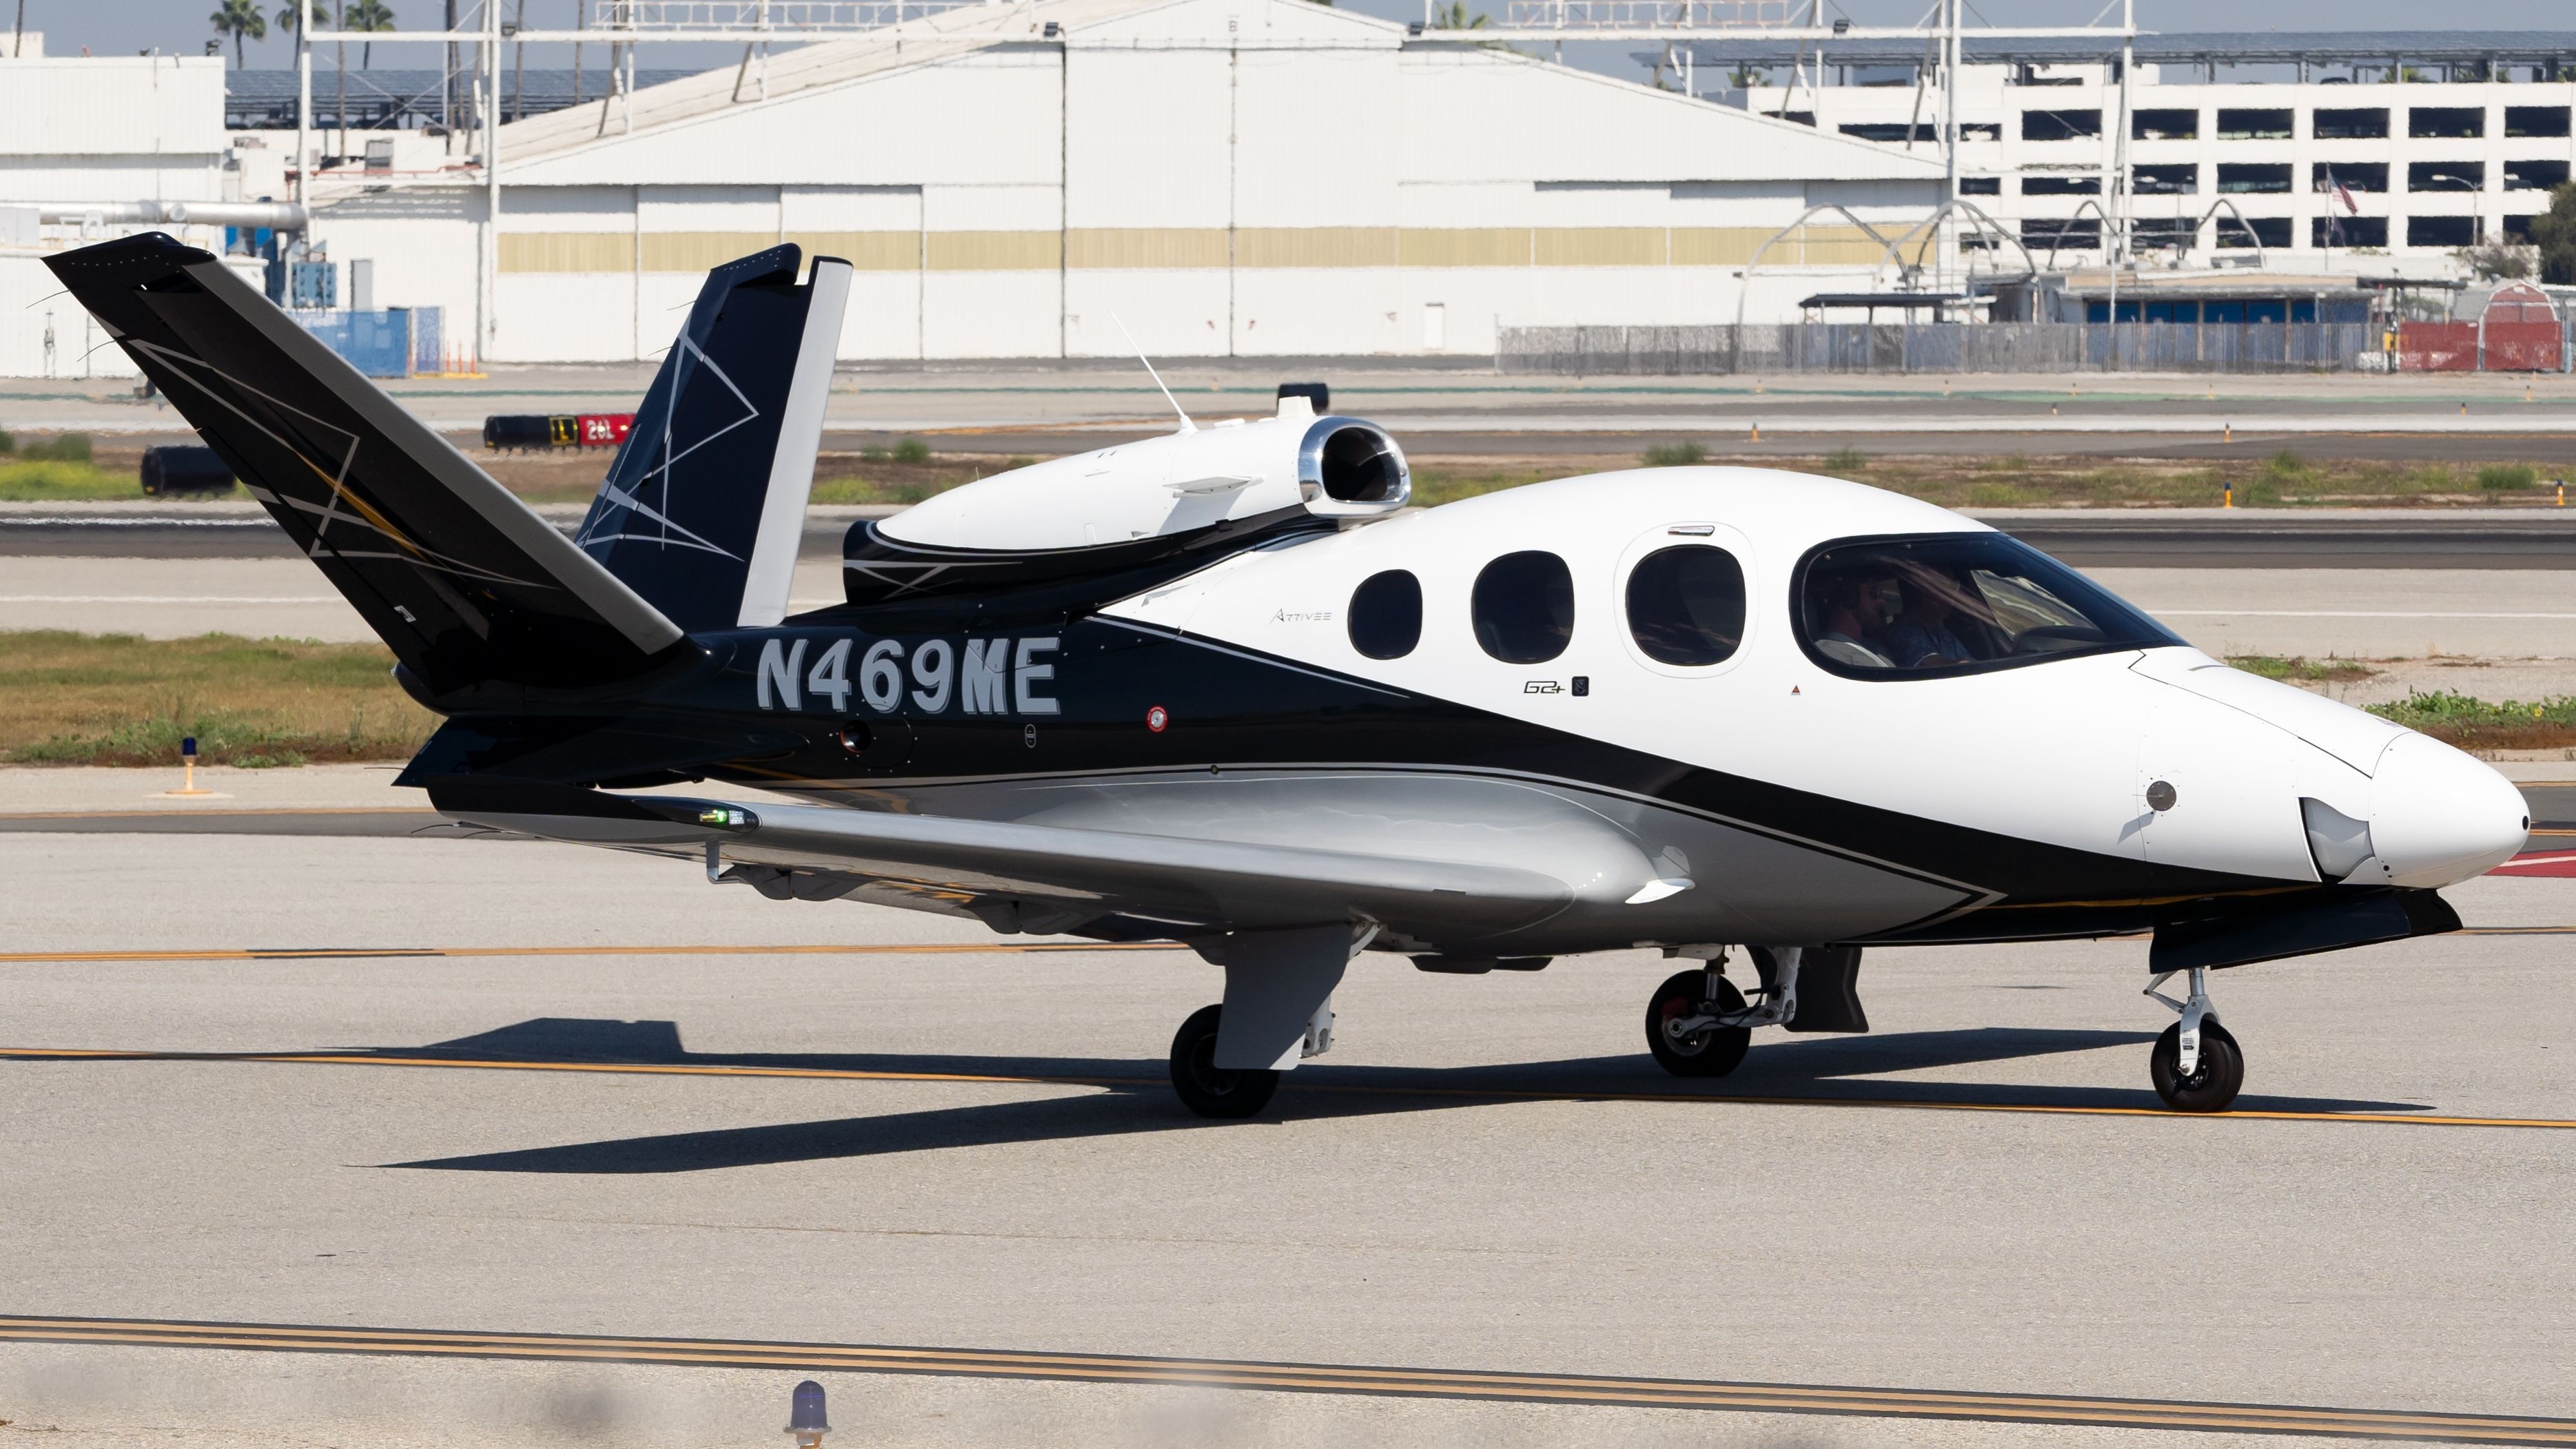 A Cirrus Vision Jet parked at an airport.